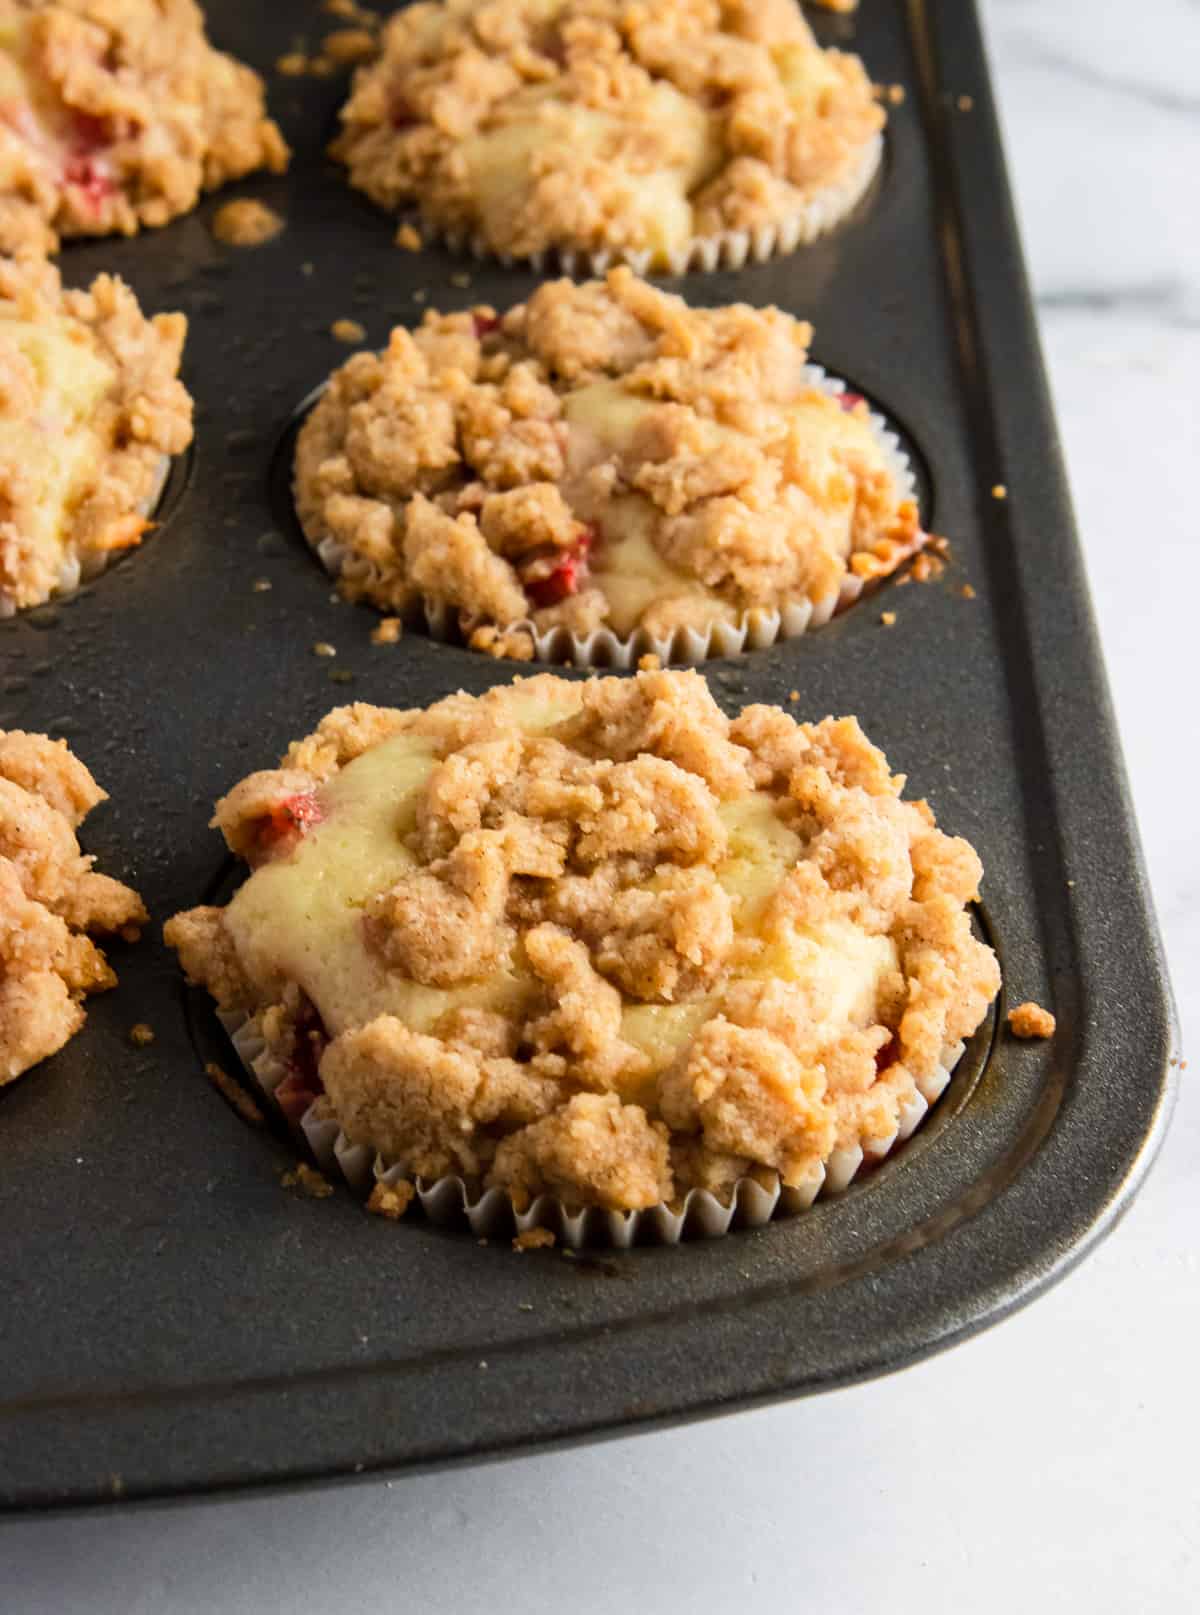 Freshly baked strawberry muffins with crumble topping in muffin tin.